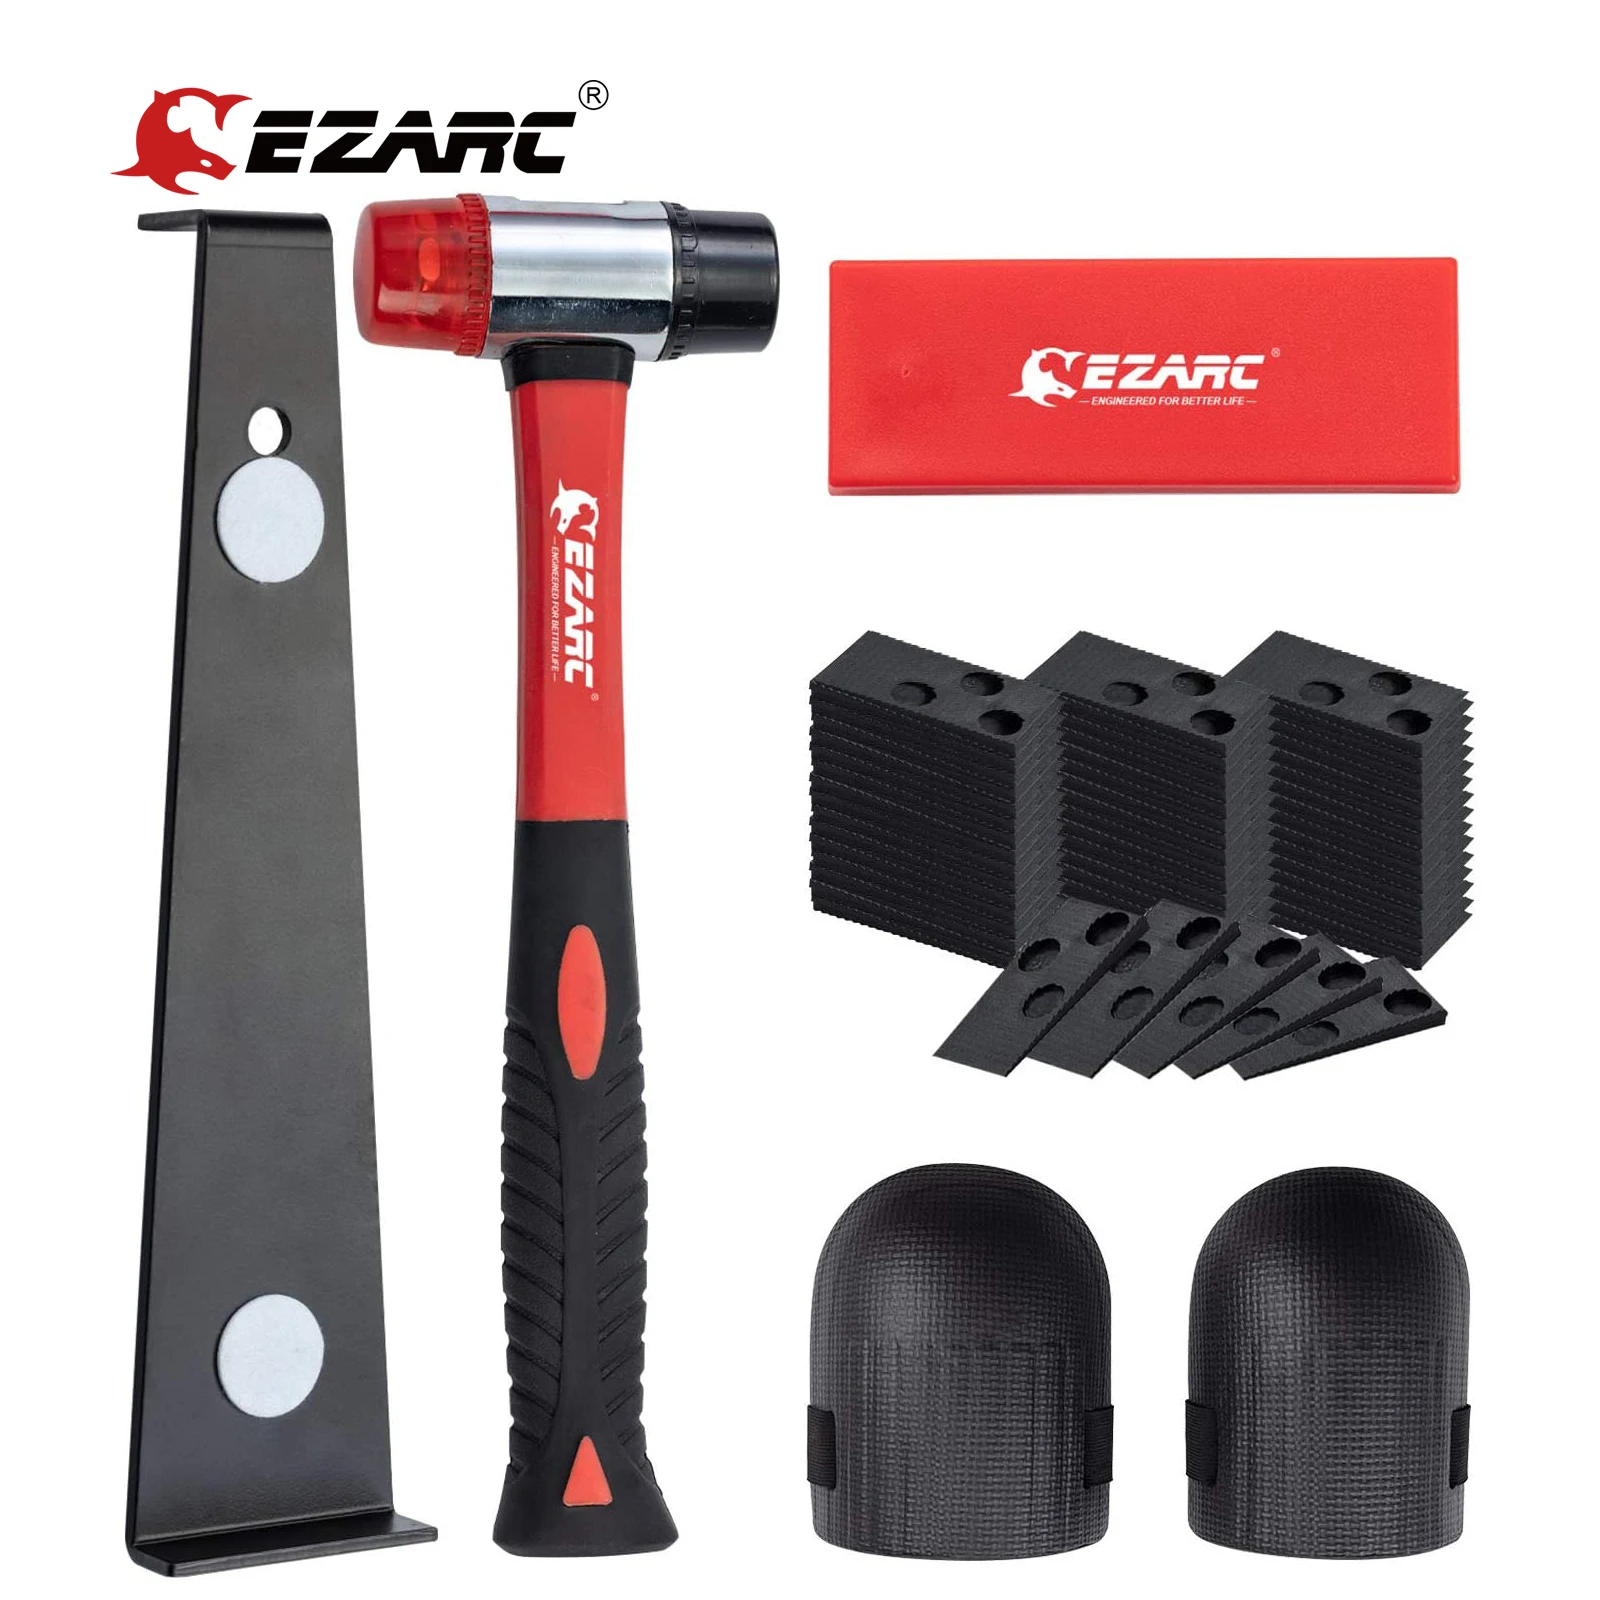 EZARC Laminate Wood Flooring Installation Kit with 60 Spacers,Pull Bar, Rubber Tapping Block, Double-Faced Mallet, Foam Kneepads